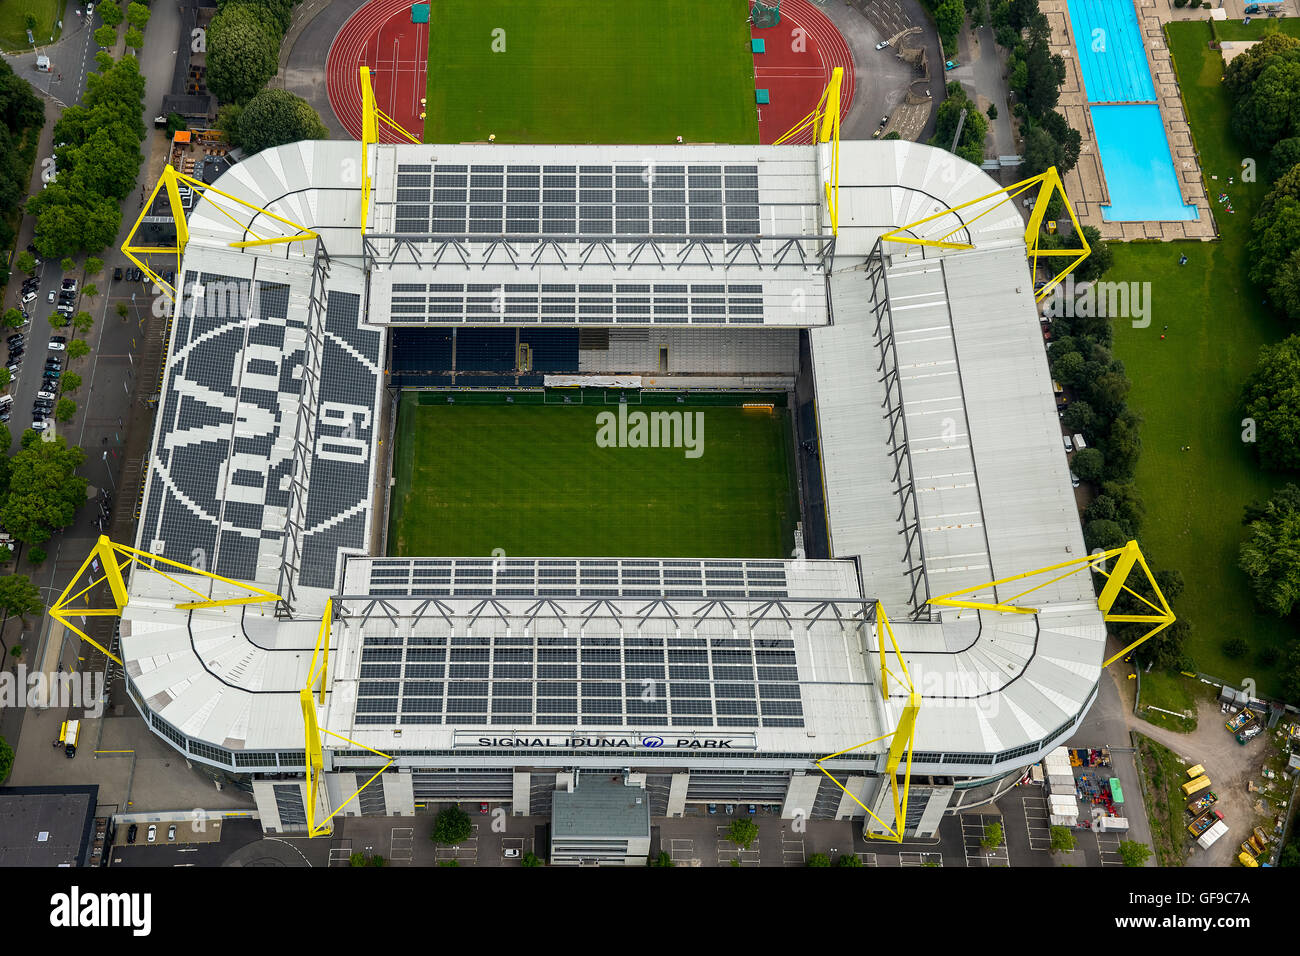 Bvb stadion hi-res stock photography and images - Alamy